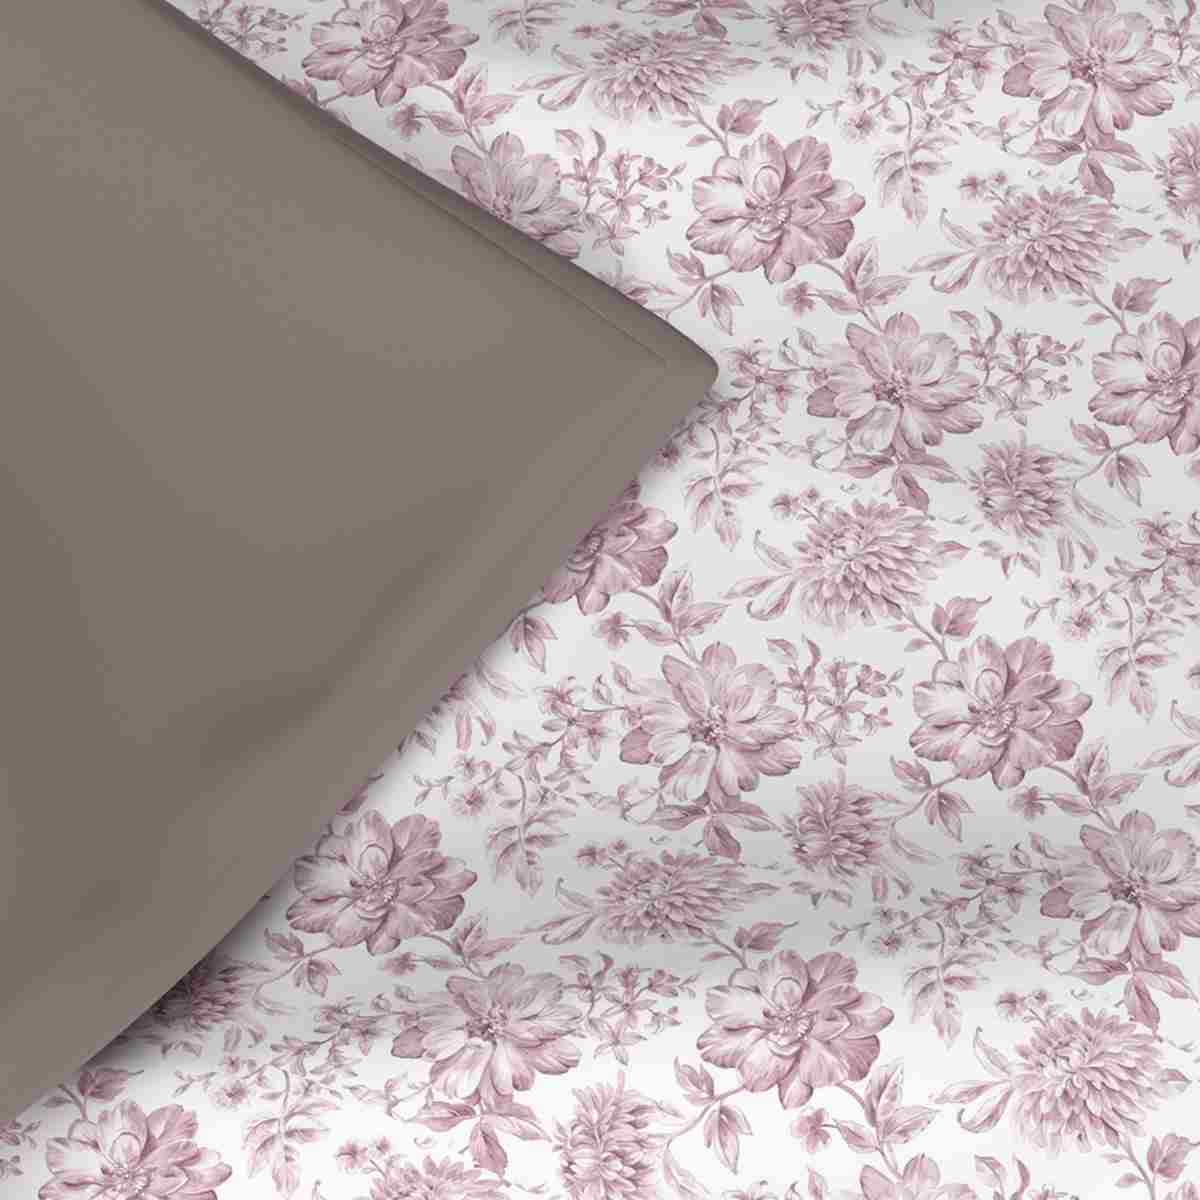 Regency Alicia Summer AC Quilt/Quilted Bed Cover/Comforter Pink